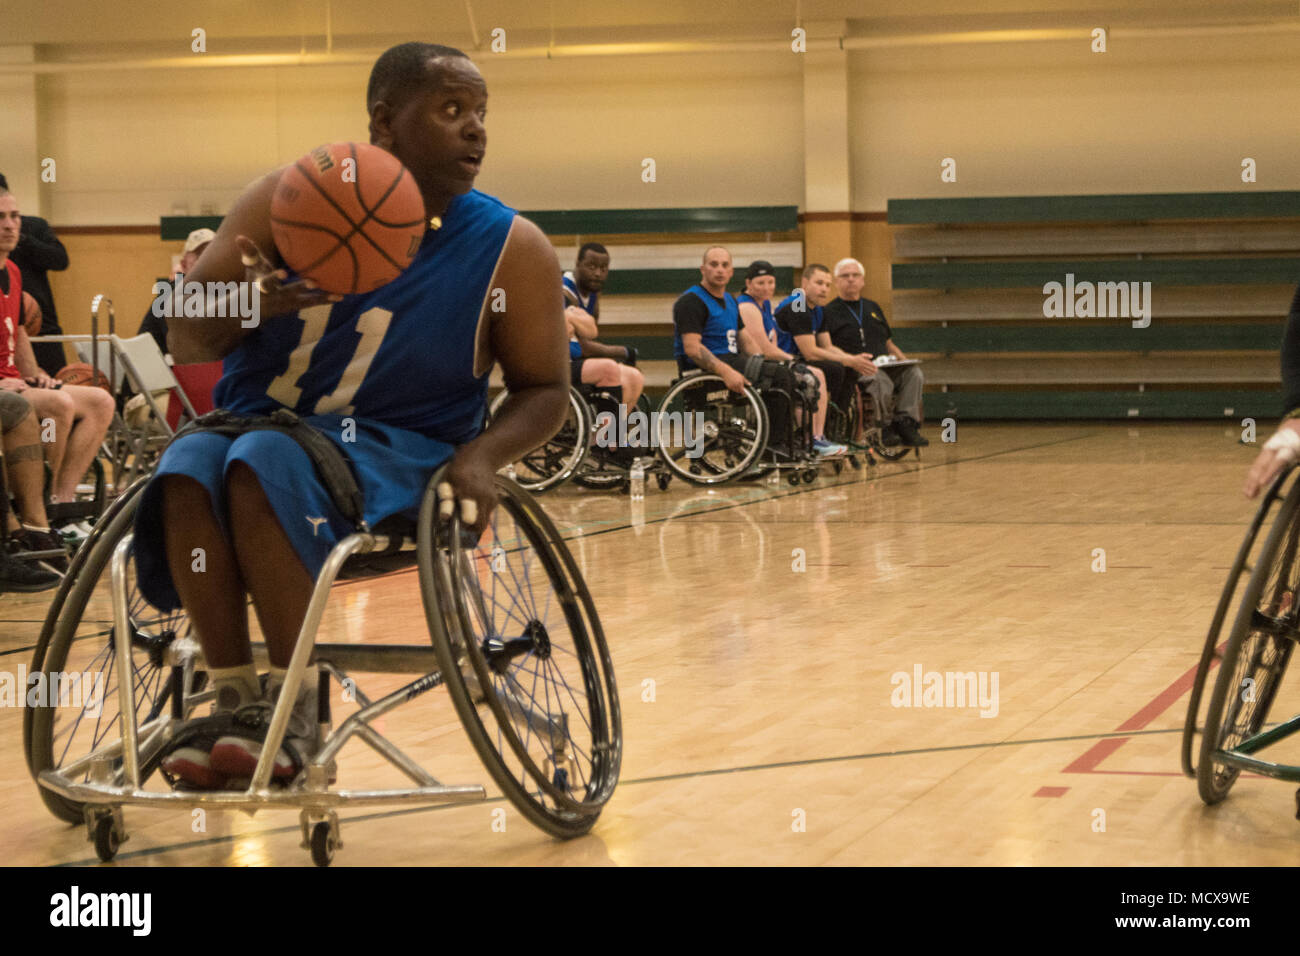 Retired U.S. Army Sgt 1st Class Carl Morgan, formerly assigned to the Warrior Transition Battalion, Fort Gillem looks for a teammate to pass the ball to during a game of Wheelchair Basketball at Fort Bliss, Texas, March 4, 2018. 74 wounded, ill or injured active duty Soldiers and veterans participate in a series of events that are held at Fort Bliss, Texas, Feb. 27 through March 9, 2018 as the Deputy Chief of Staff, Warrior Care and Transition host the 2018 Army Trials. (U.S. Army photo by Sgt. Brooks Schnetzler) Stock Photo